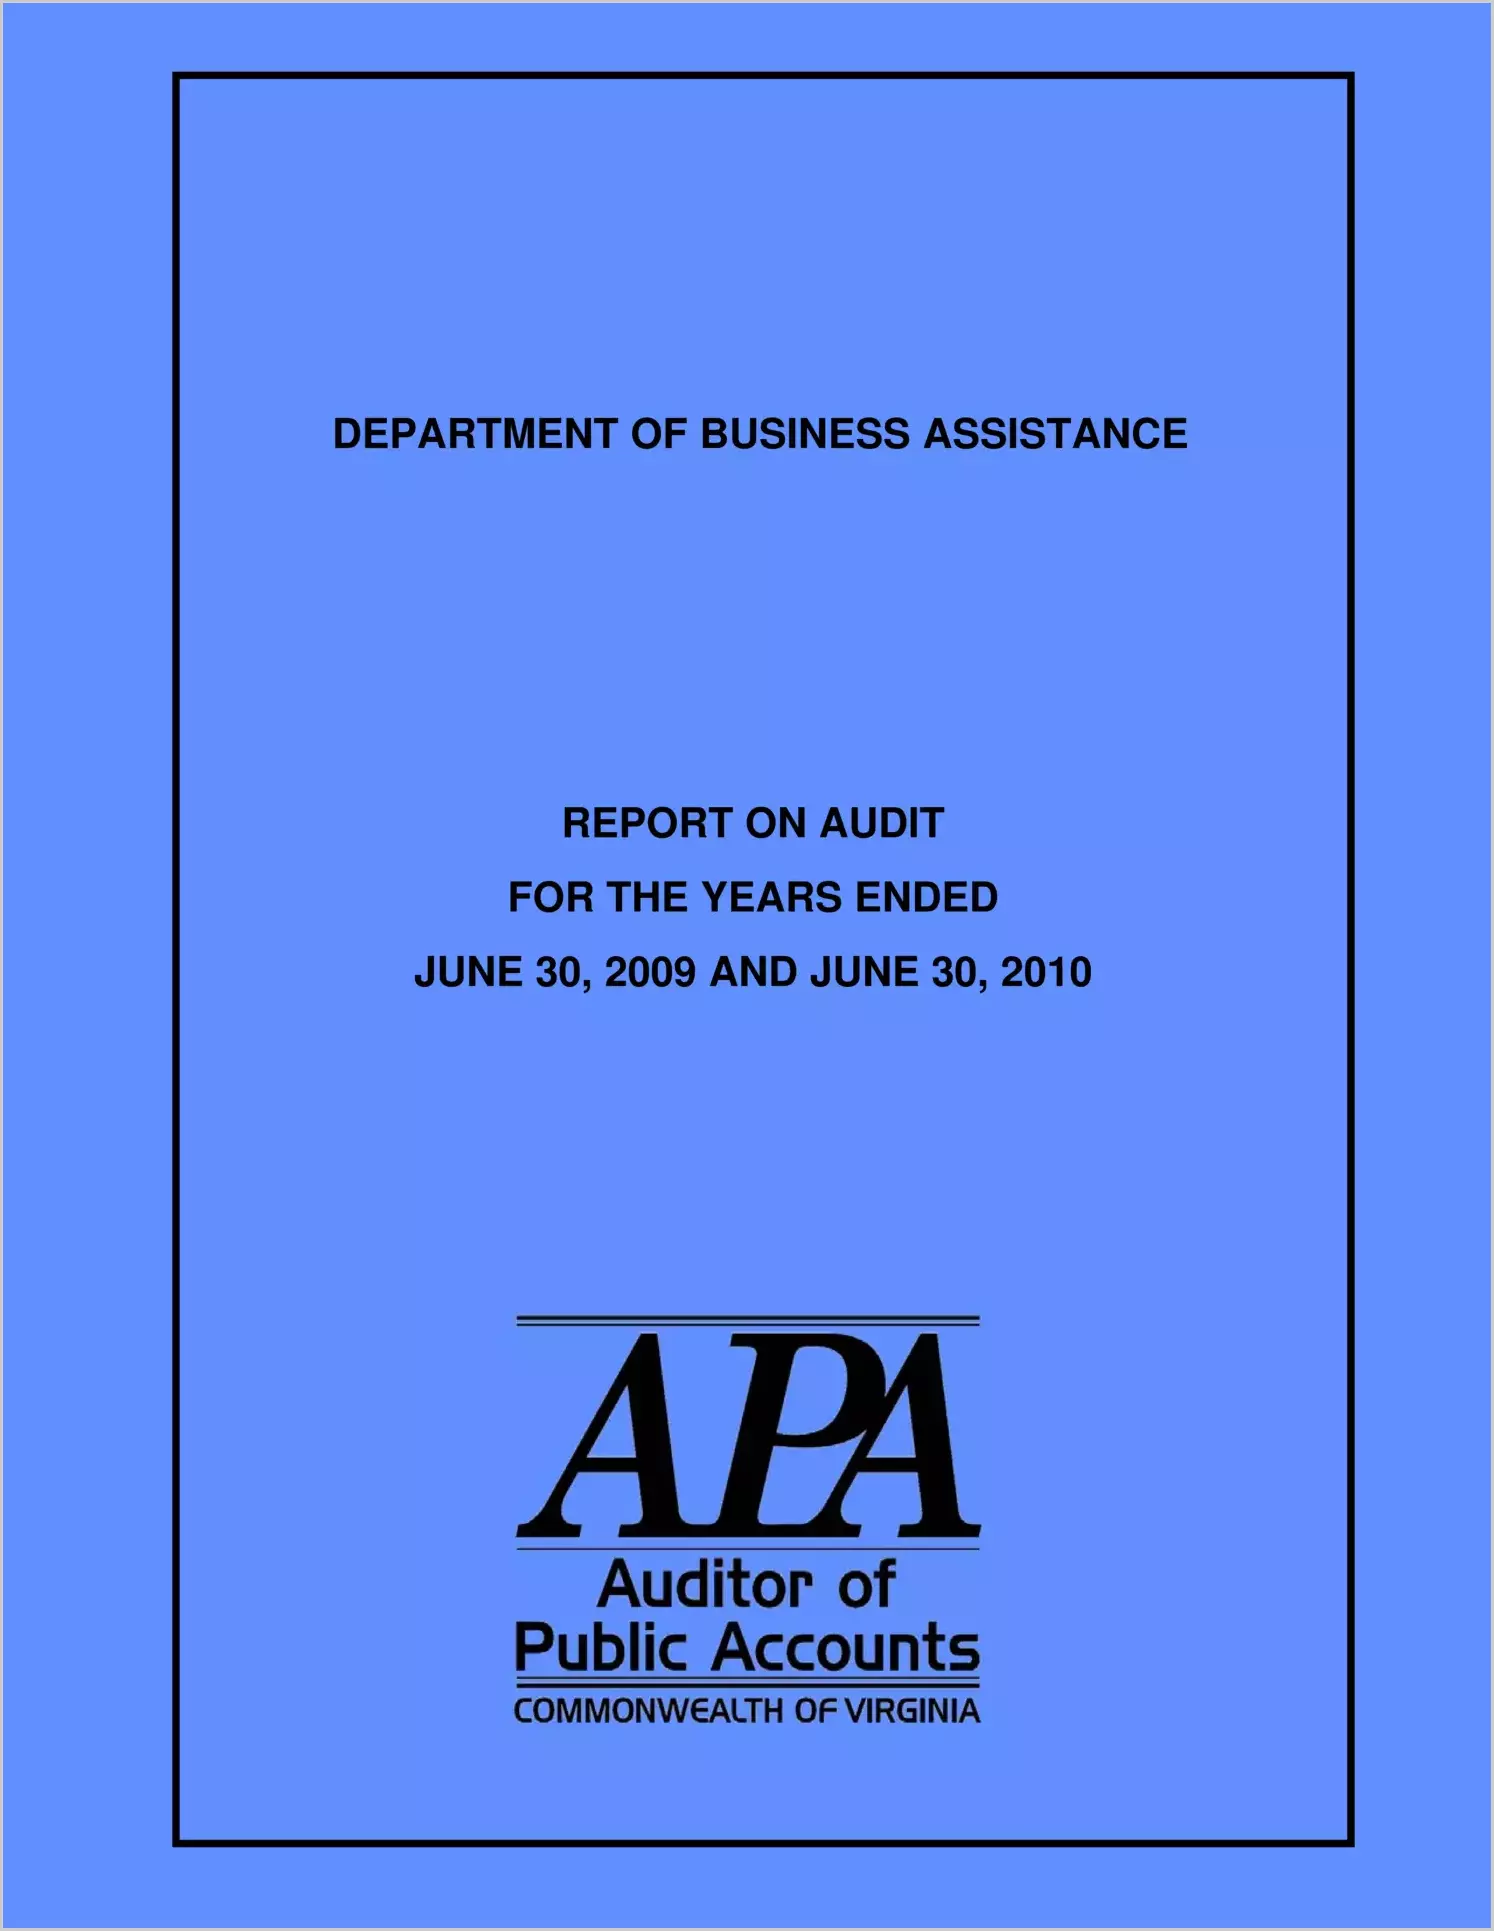 Department of Business Assistance Report on Audit Years Ended June 30, 2009 and June 30, 2010